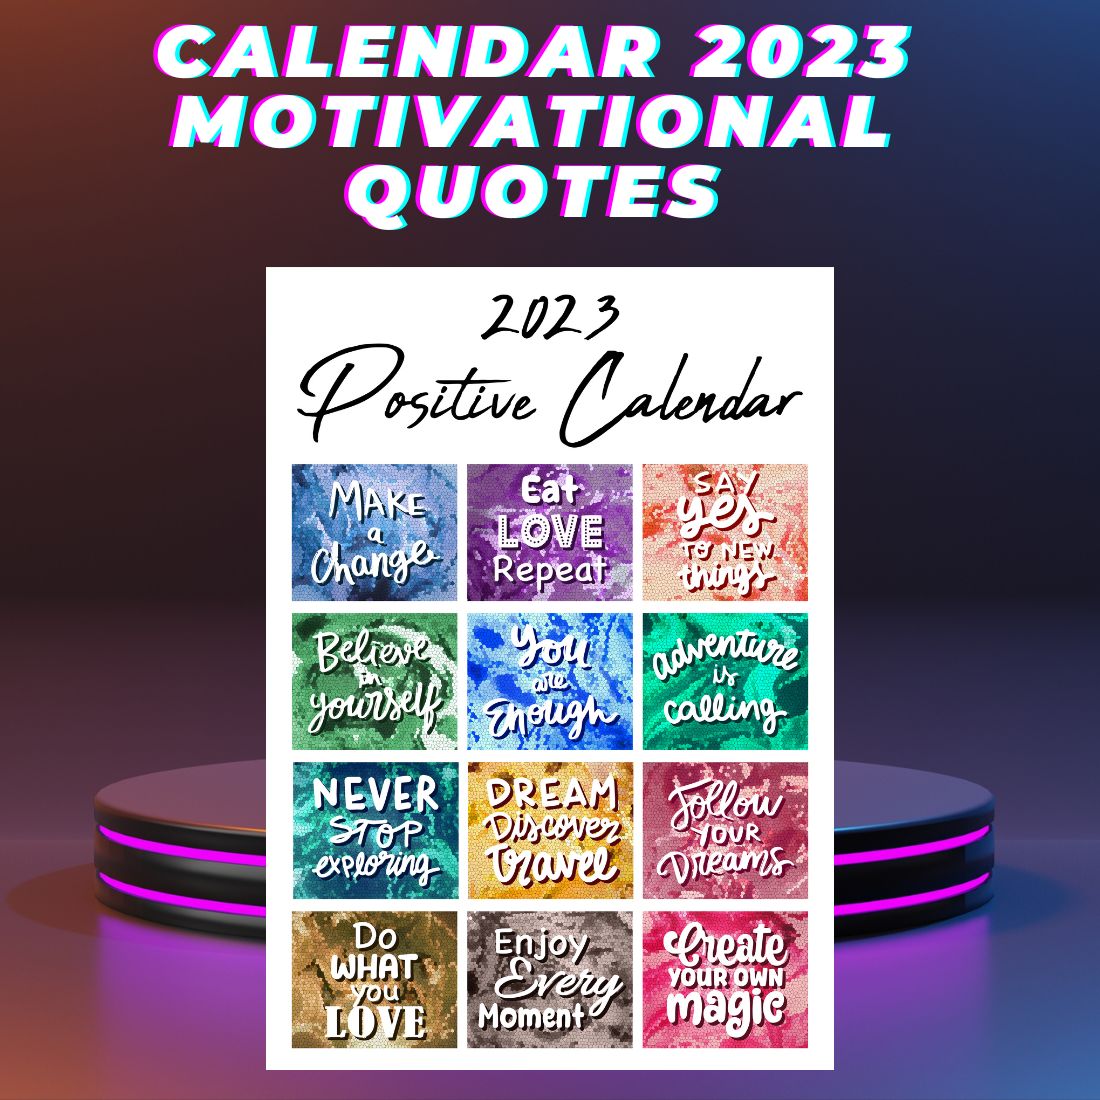 Wall Calendar Motivational Quotes cover image.